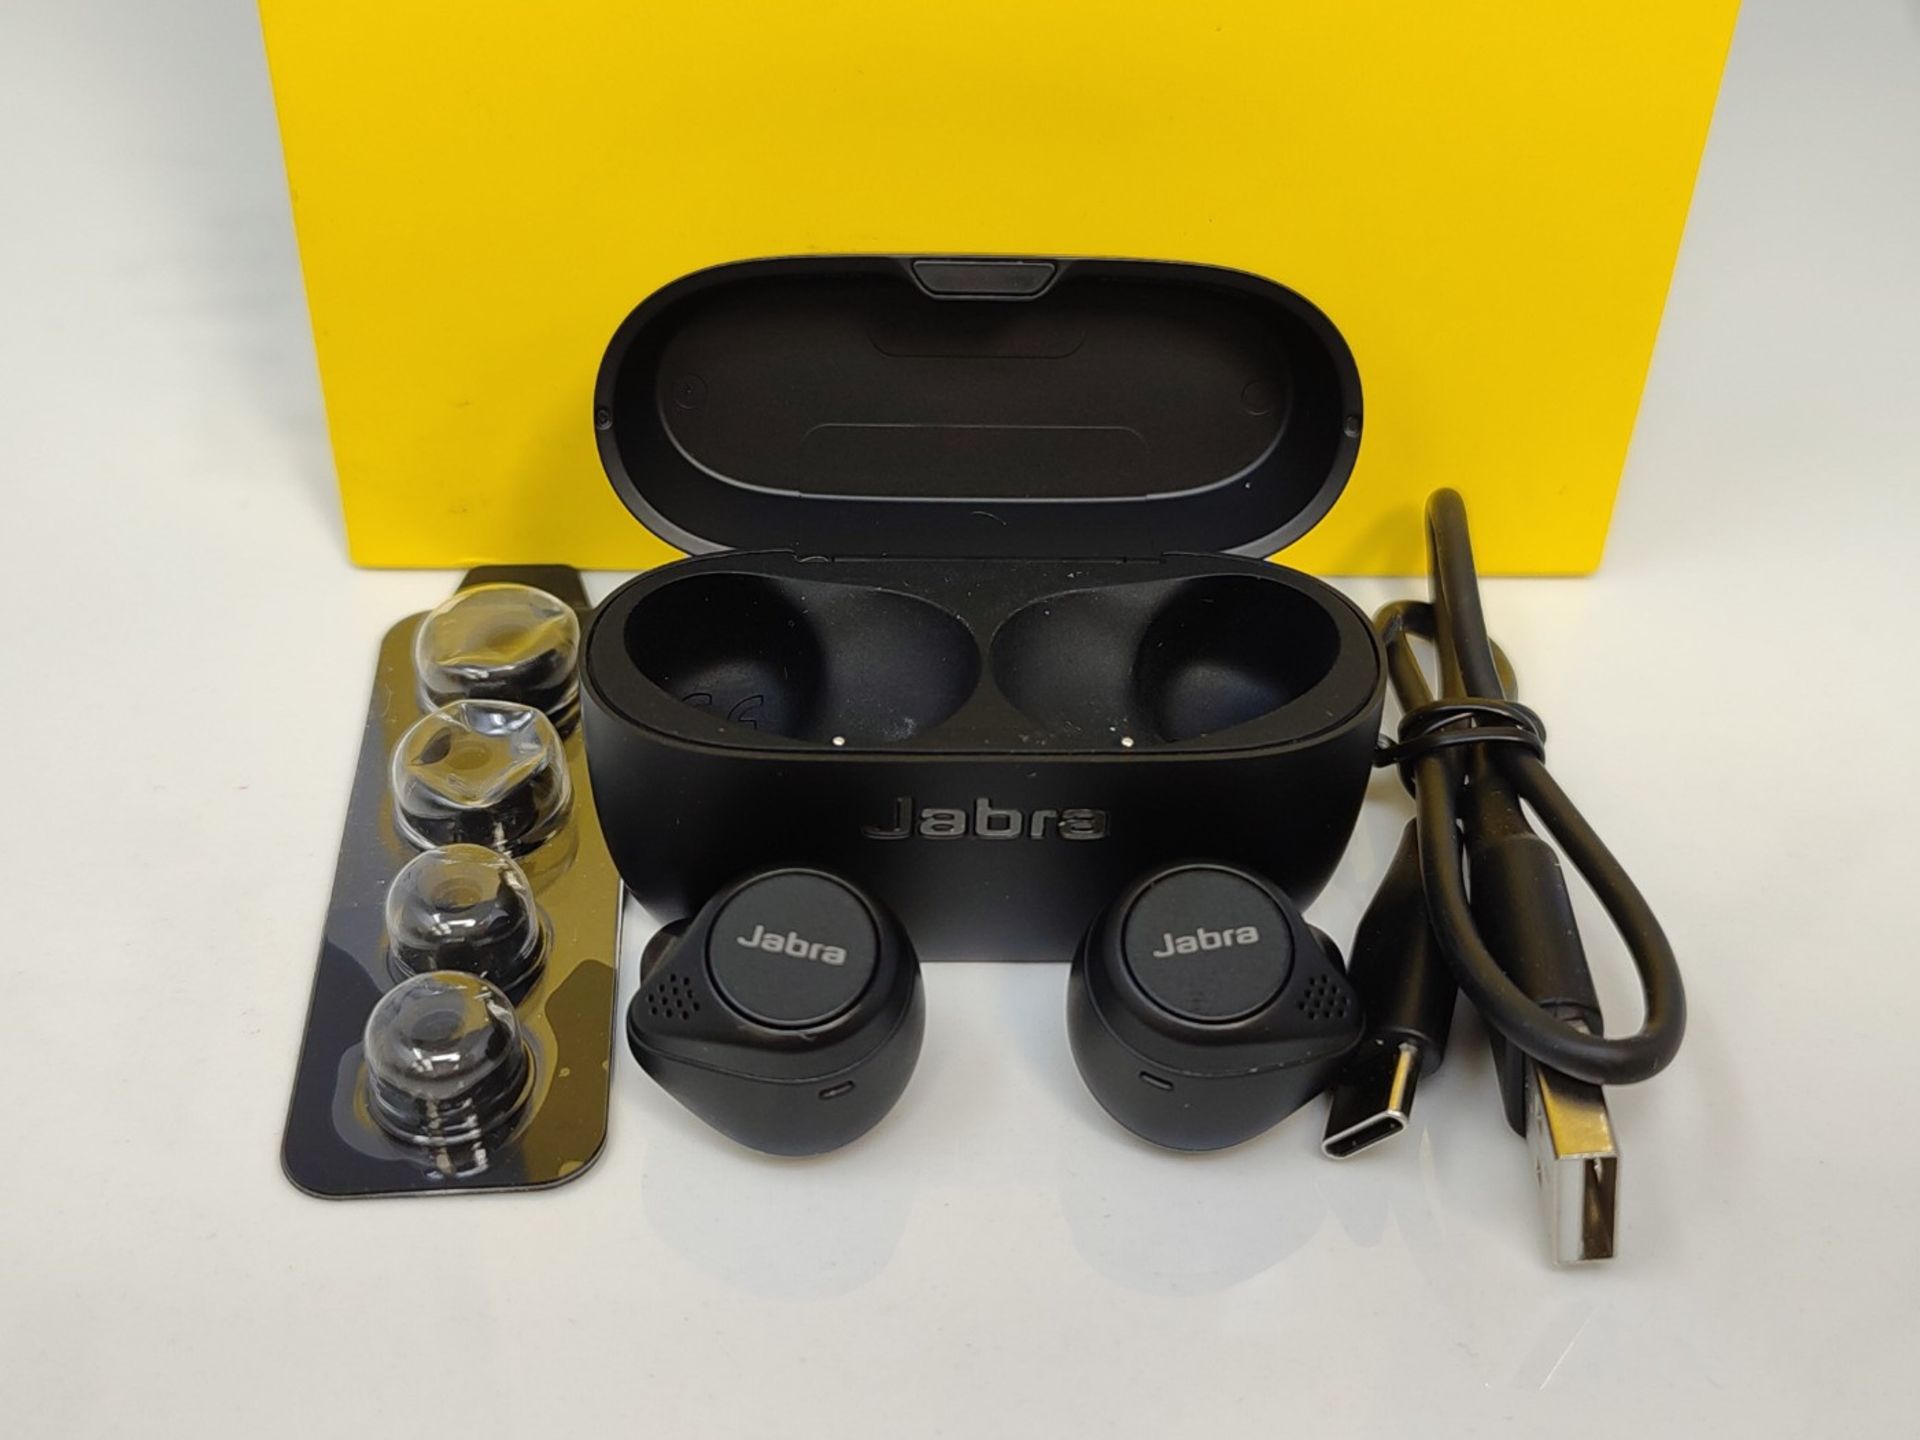 RRP £124.00 Jabra Elite 75t - In-ear Bluetooth headphones with active noise cancellation (ANC) and - Image 6 of 6